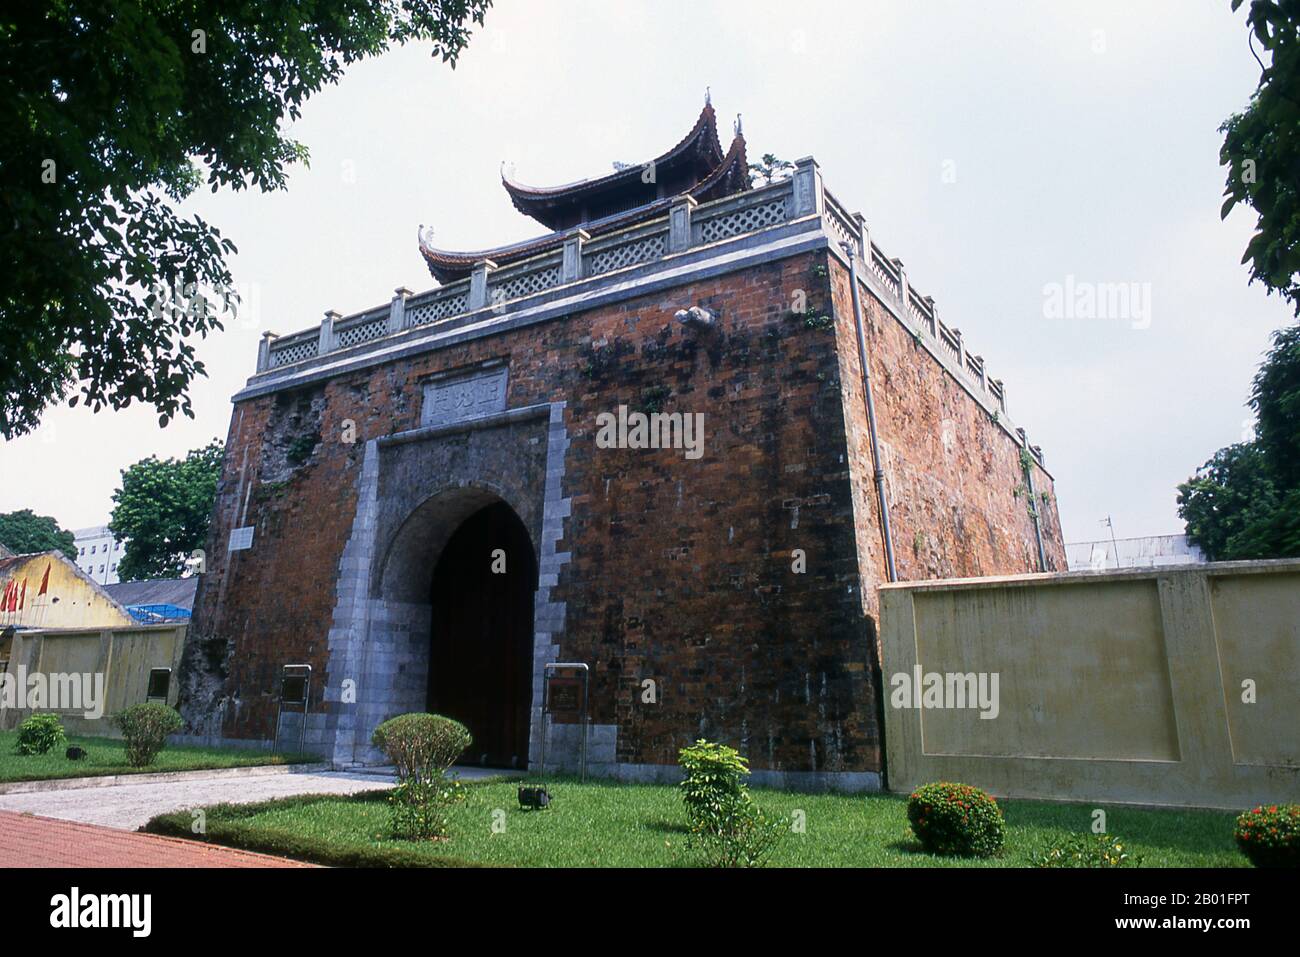 Vietnam: Cua Bac Gate, Hanoi Citadel, Hanoi.  The Hanoi Citadel was constructed in 1010 by Emperor Ly Thai To of the Ly Dynasty. He moved the capital from Hoa Lu to Thang Long, the modern day Hanoi. Stock Photo